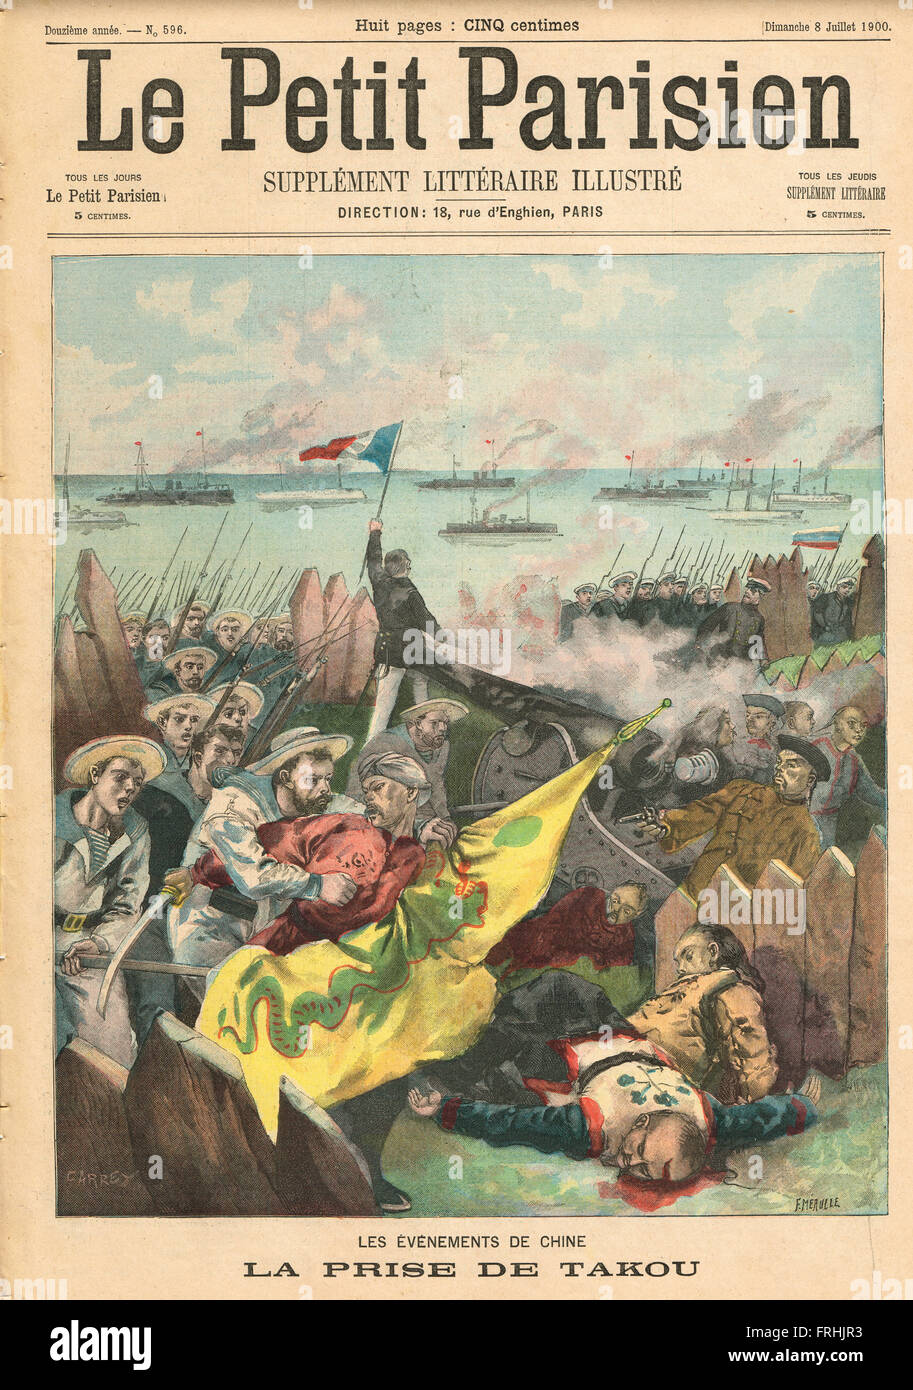 French capturing the port of Takou China 1900.  French illustrated newspaper Le Petit Parisien illustration Stock Photo